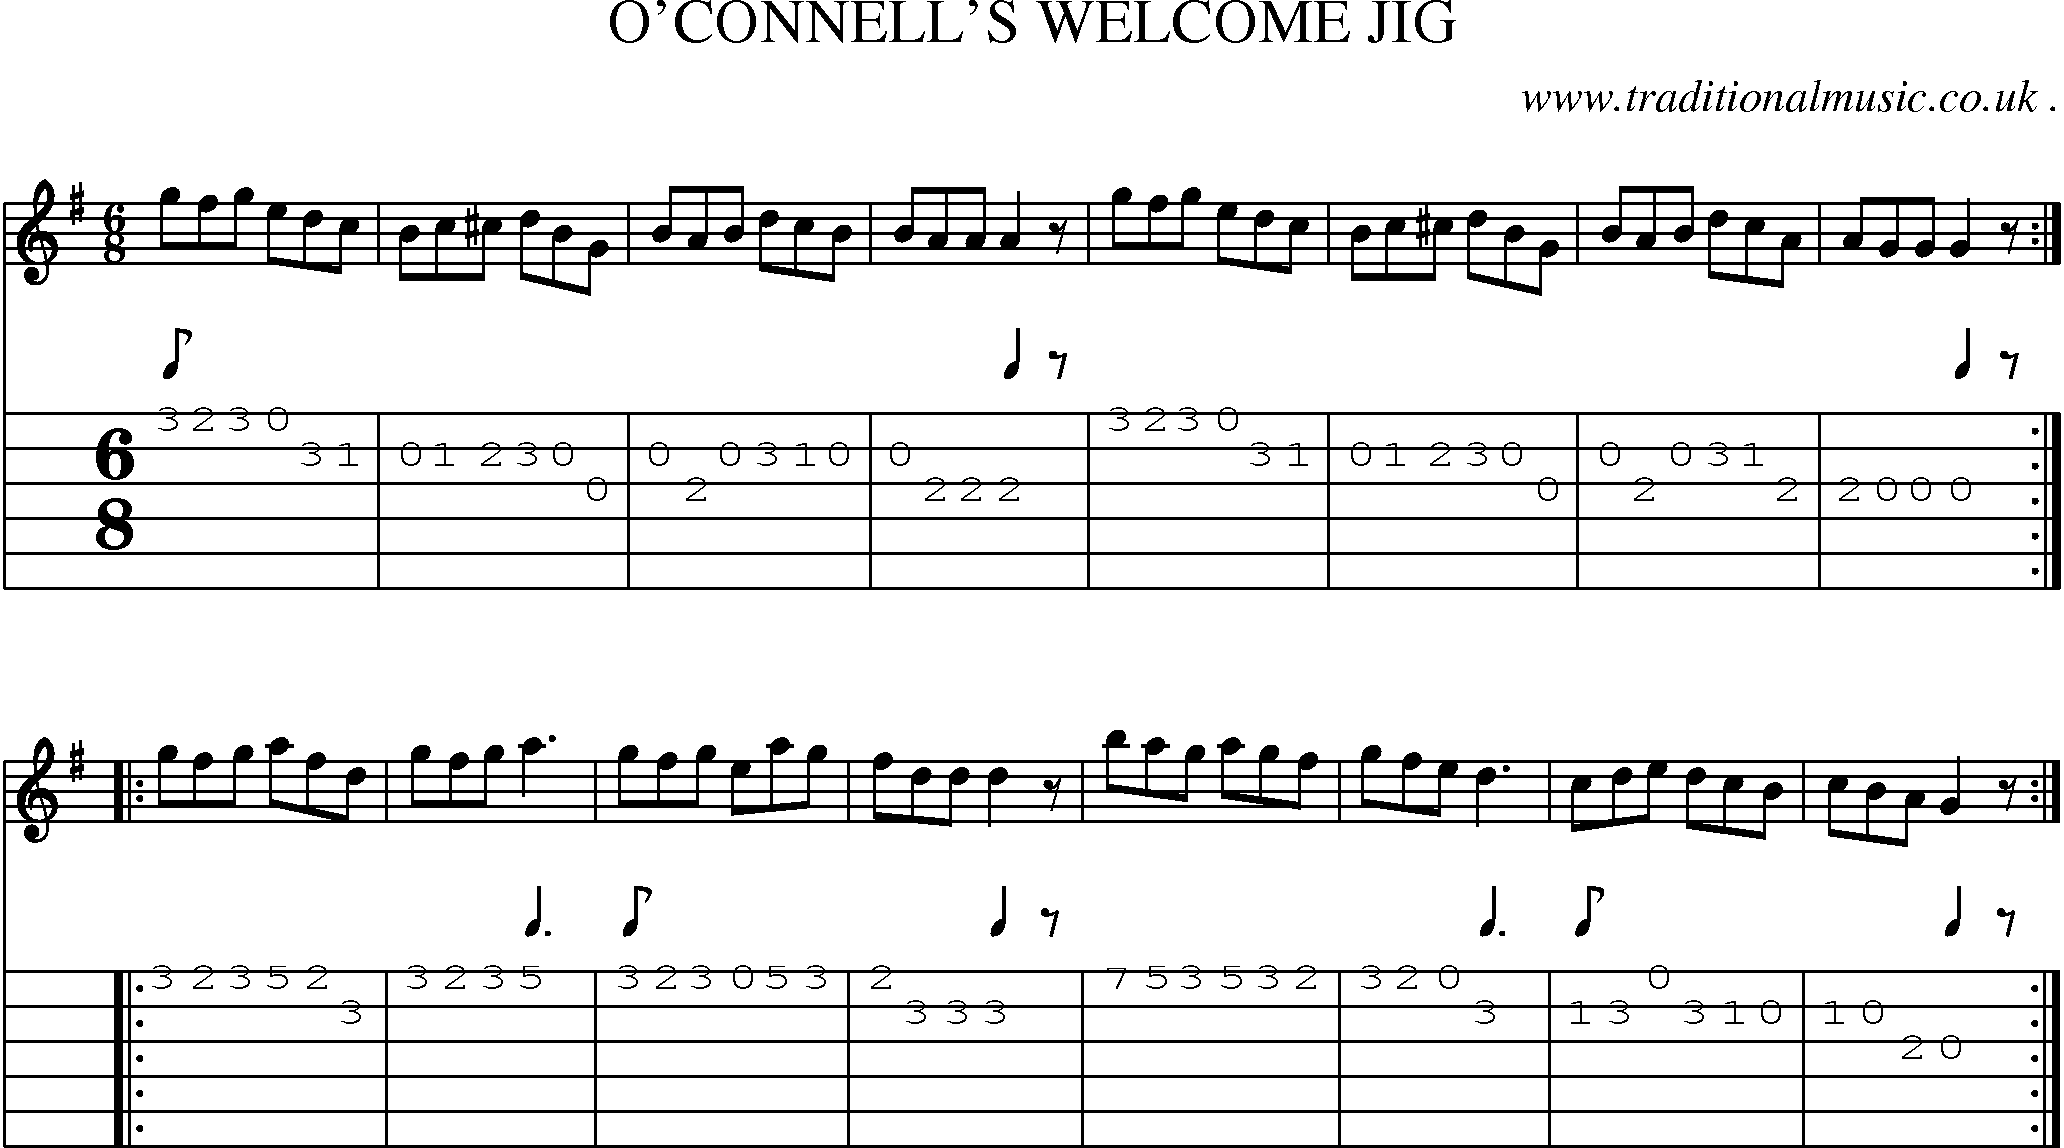 Sheet-Music and Guitar Tabs for Oconnells Welcome Jig